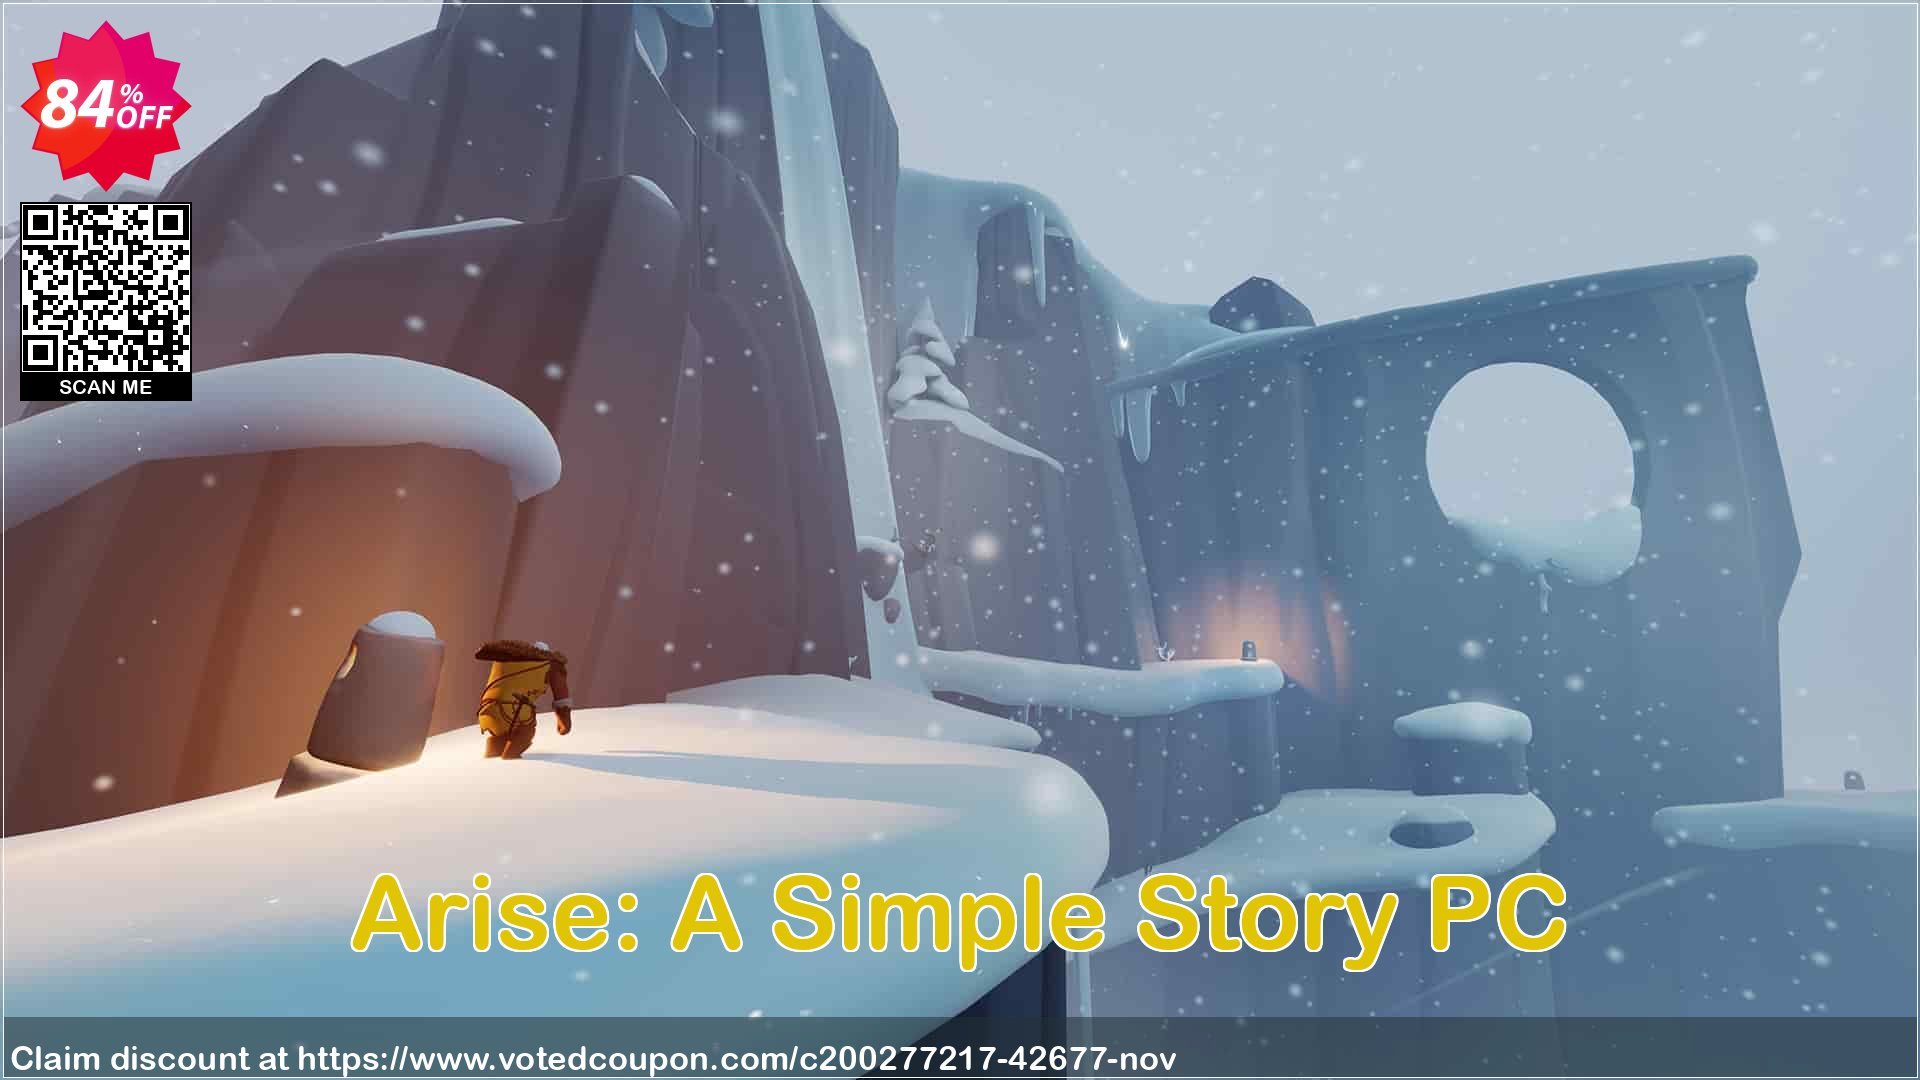 Arise: A Simple Story PC Coupon Code Jun 2024, 84% OFF - VotedCoupon